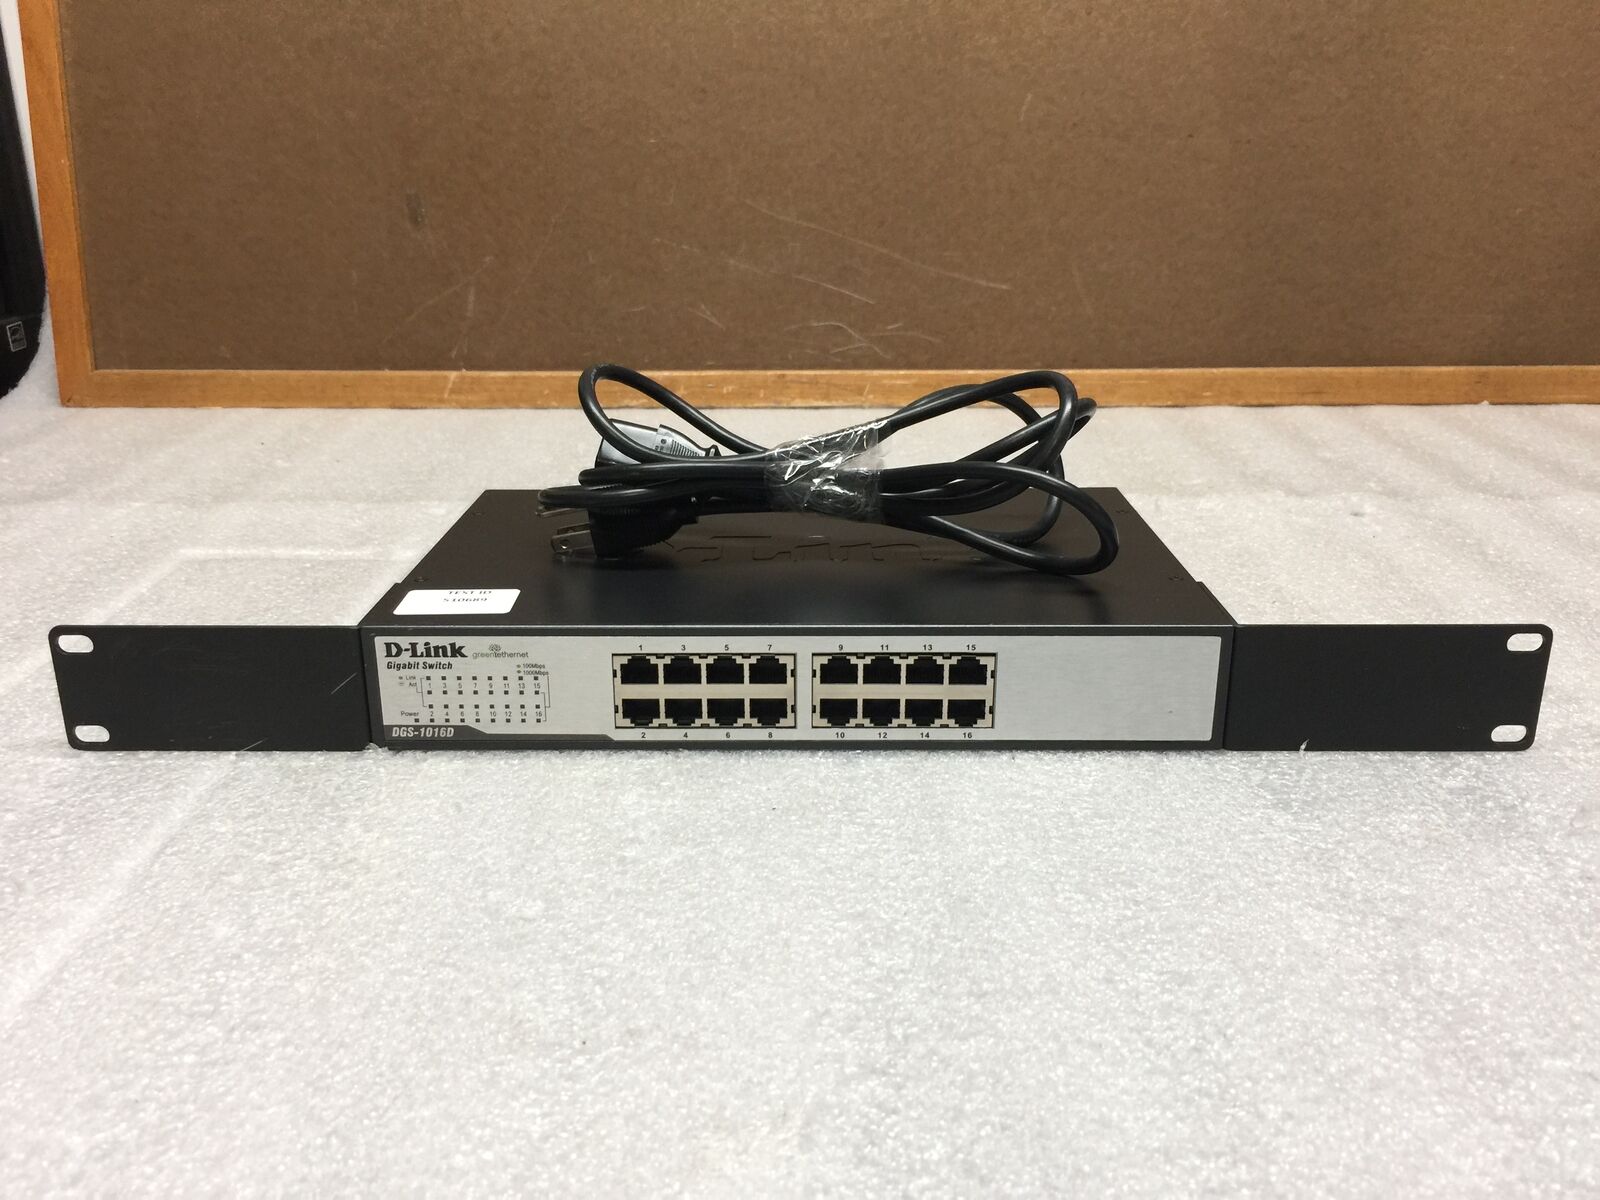 D-Link DGS-1016D 16 Port Gigabit Switch With Rack Mount - TESTED & WORKING